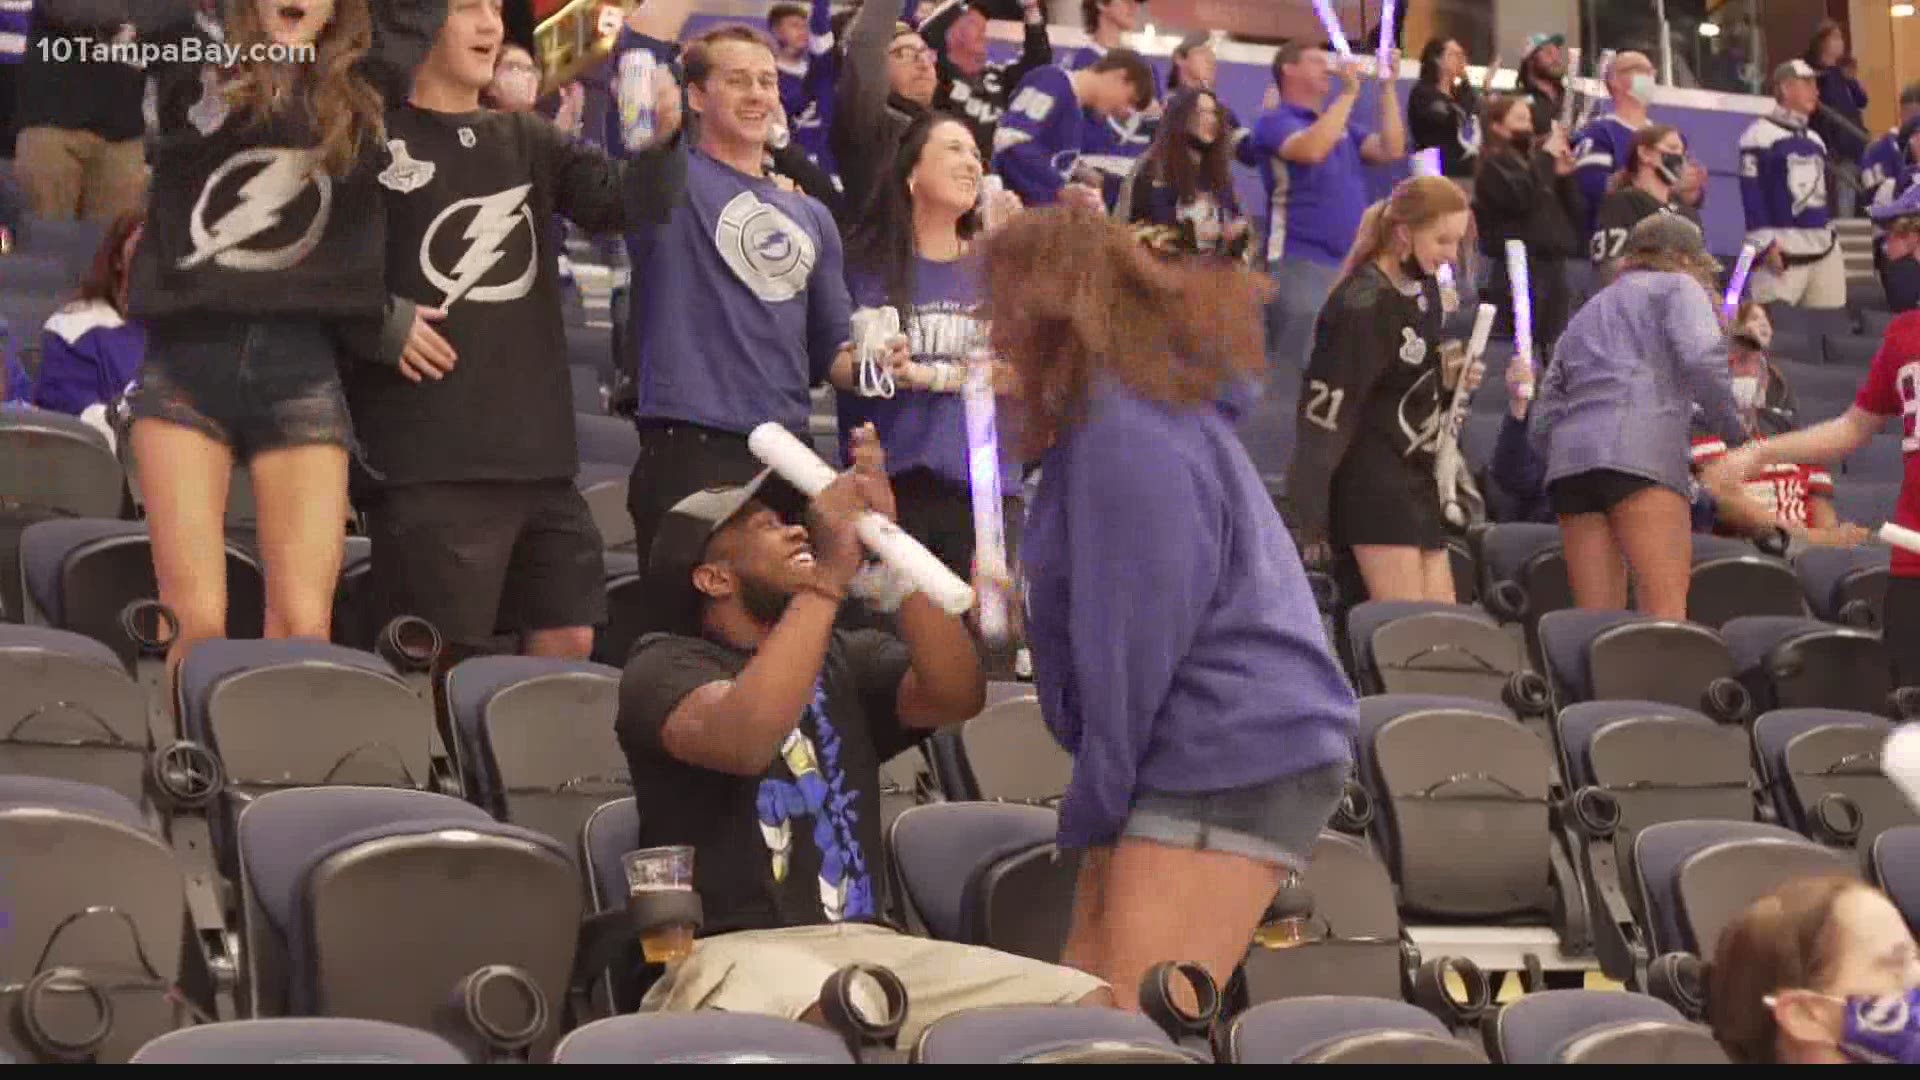 As fans in Florida trickle back into Amalie Arena for in-person game experiences, Bolts fans around the world keep cheering as loudly as ever.